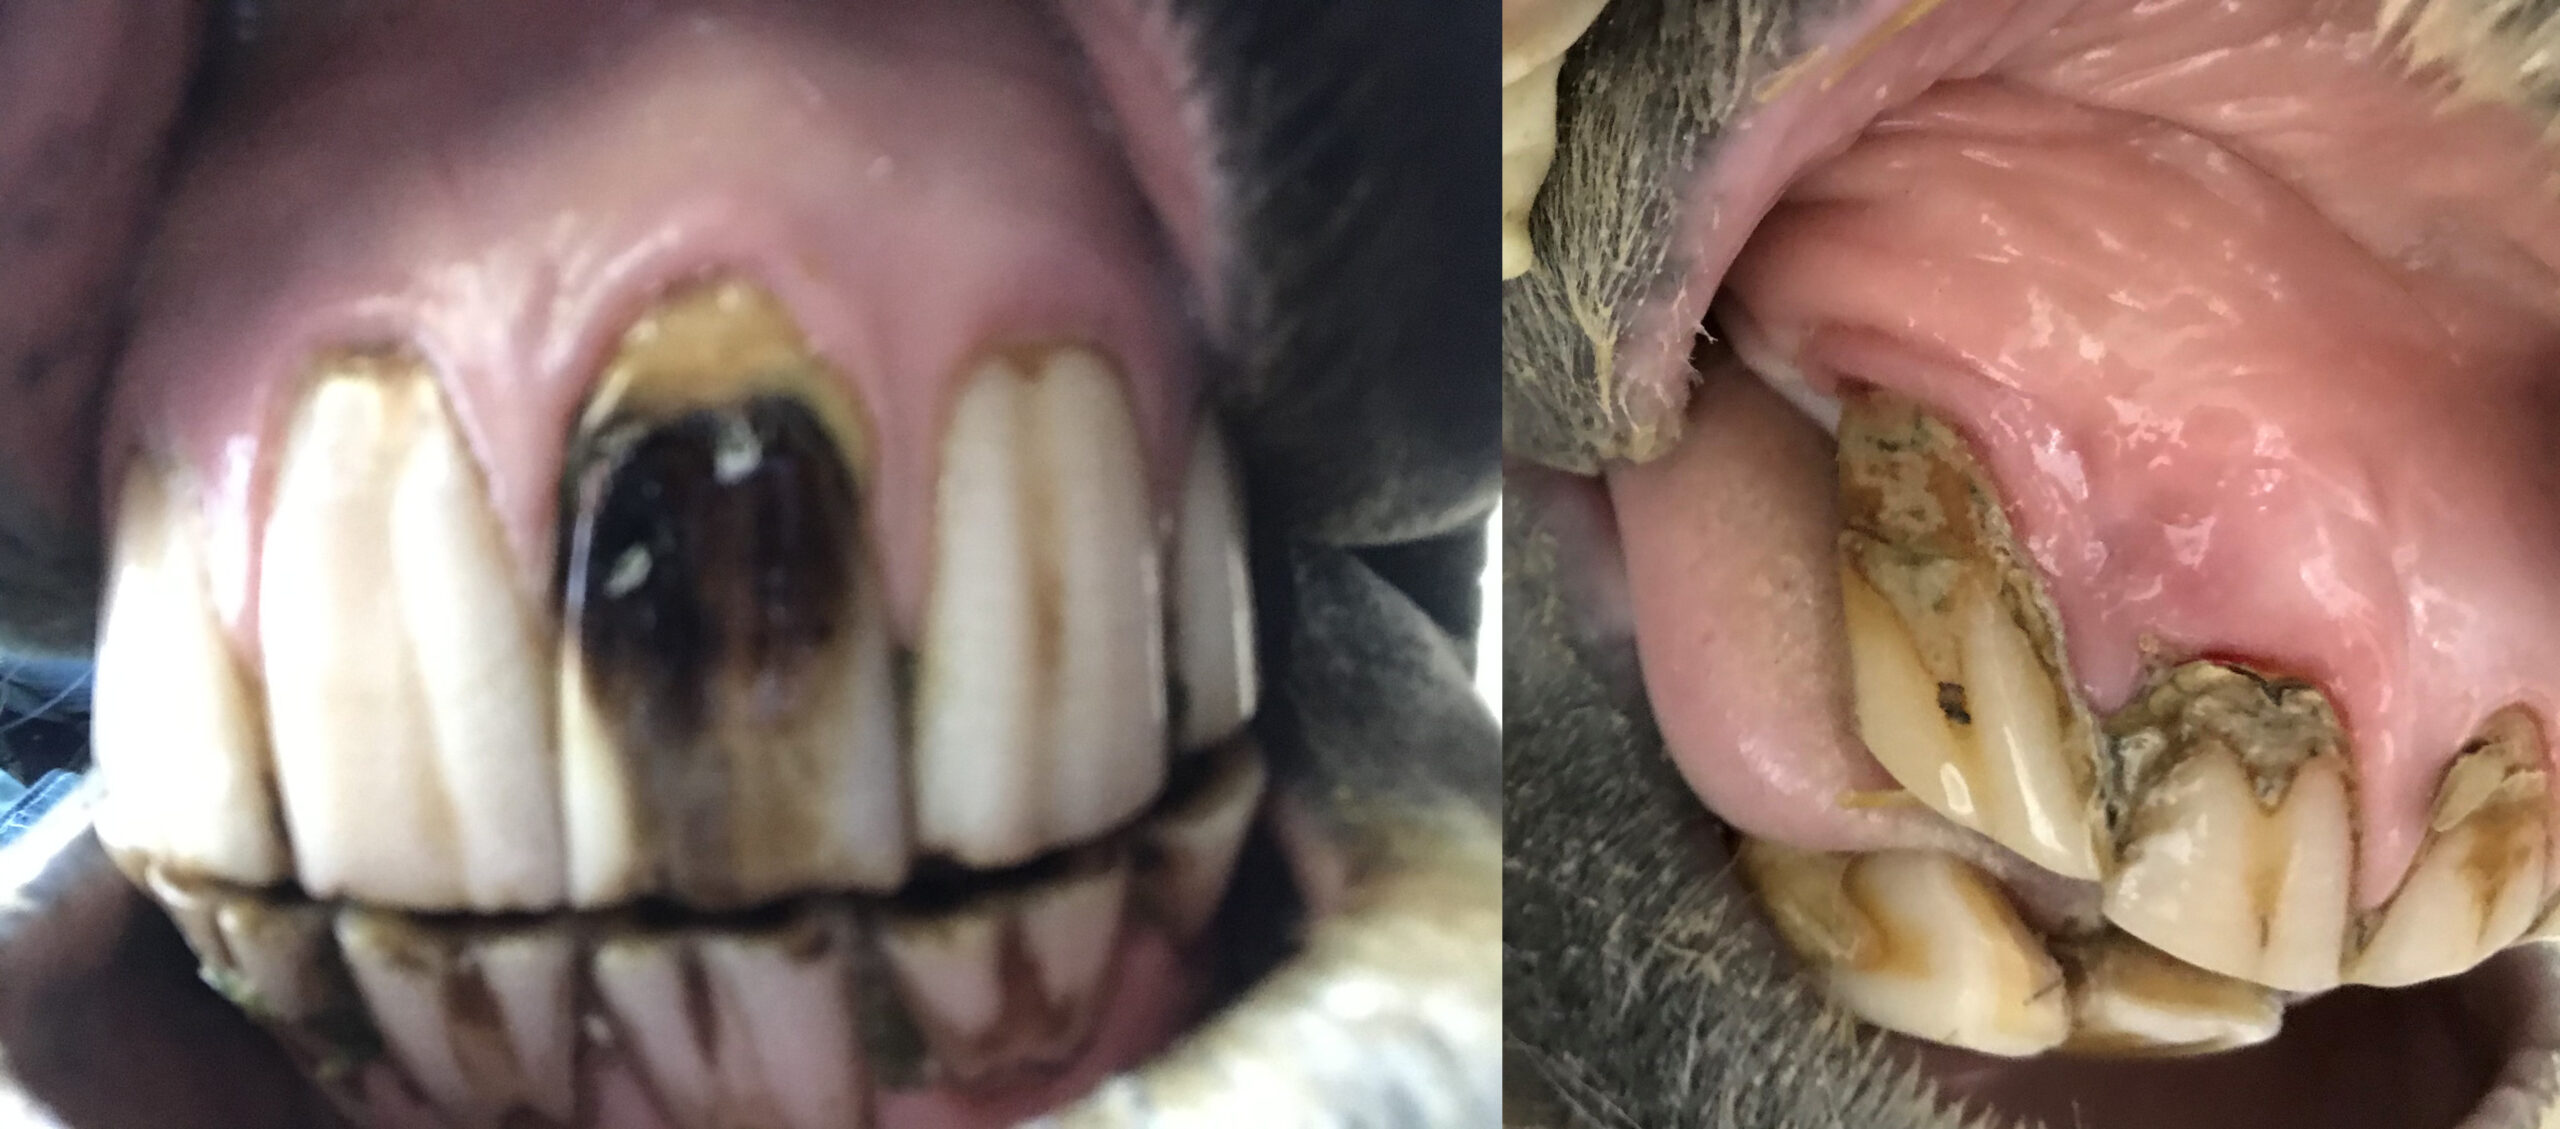 Several examples of EOTRH, note red gum around diseased root; sometimes it forms a thickened gum rim around the tooth as the gum receeds. Often there is an excessive build up of tartar or cement (yellowy stuff). Often teeth fracture or are lost.